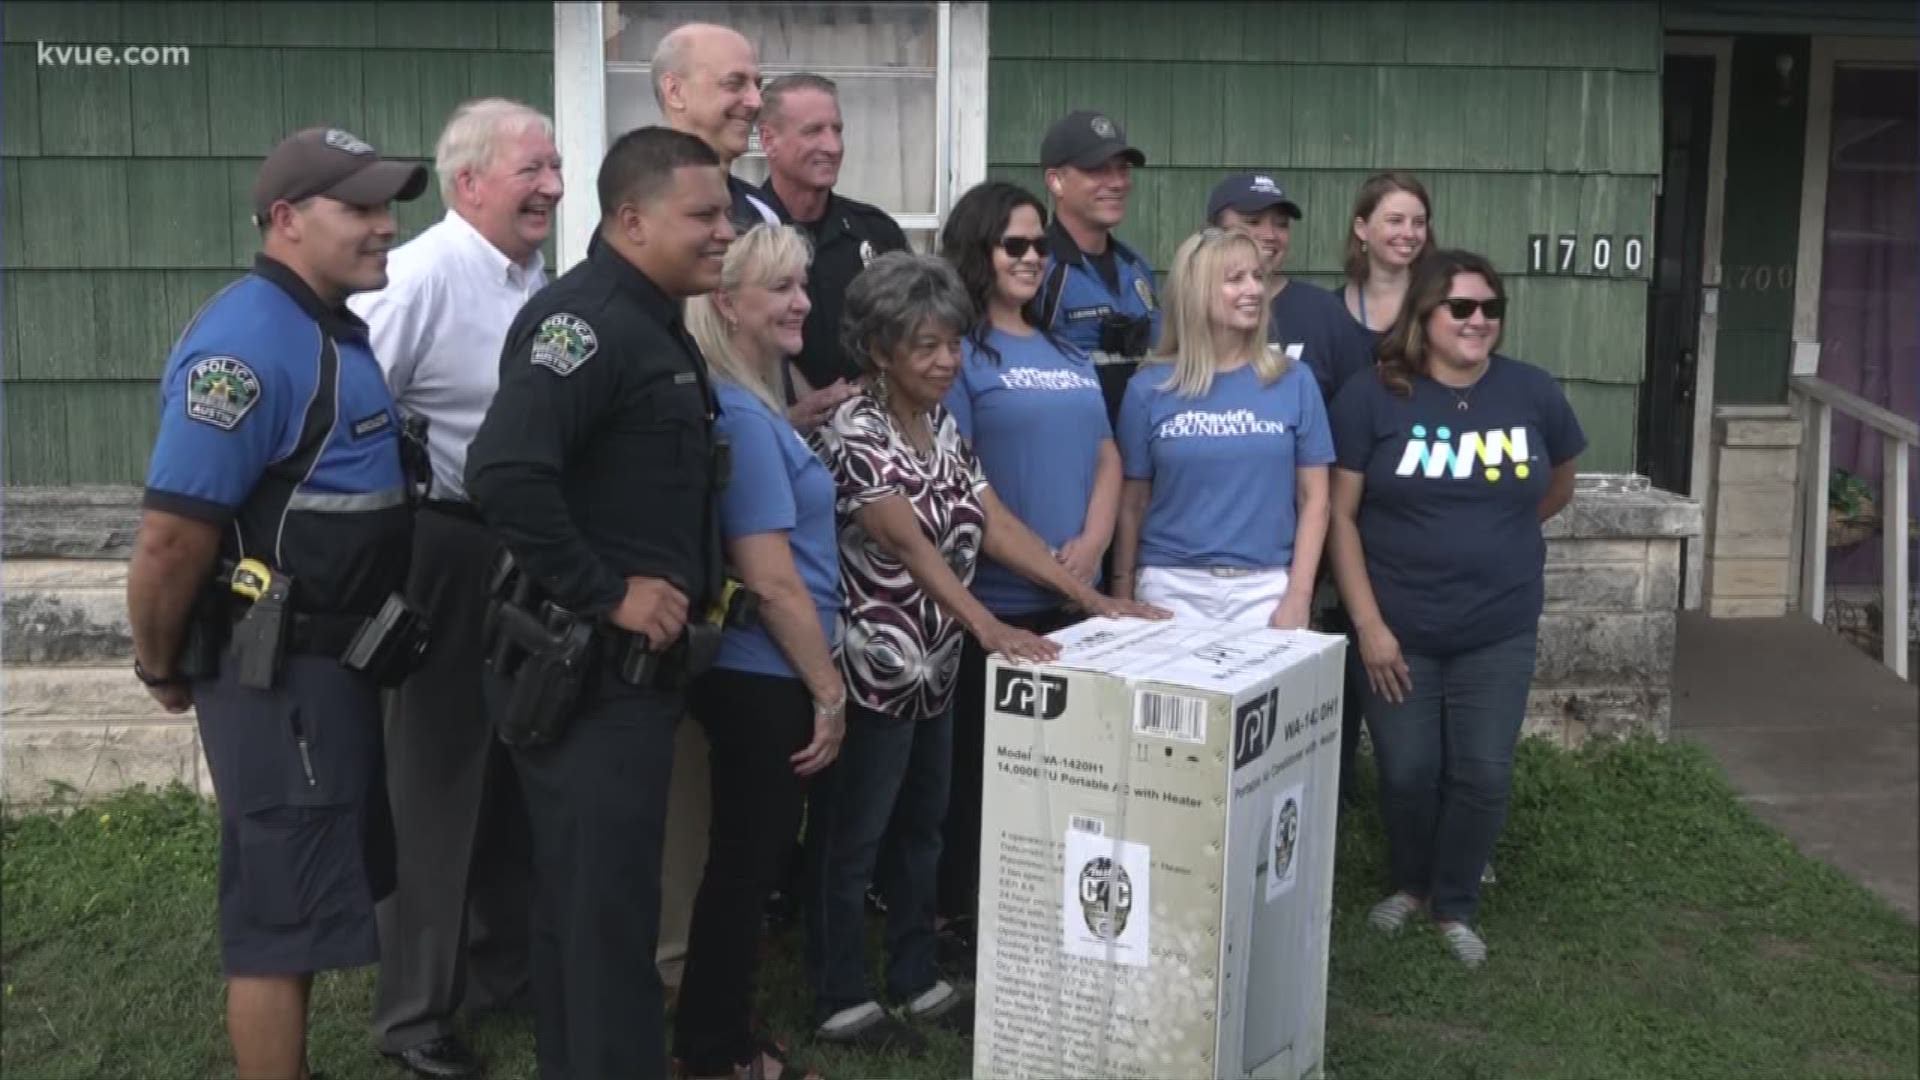 The Austin Police Department, Meals on Wheels of Central Texas and the St. David's Foundation are teaming up to provide air conditioners for people in need.